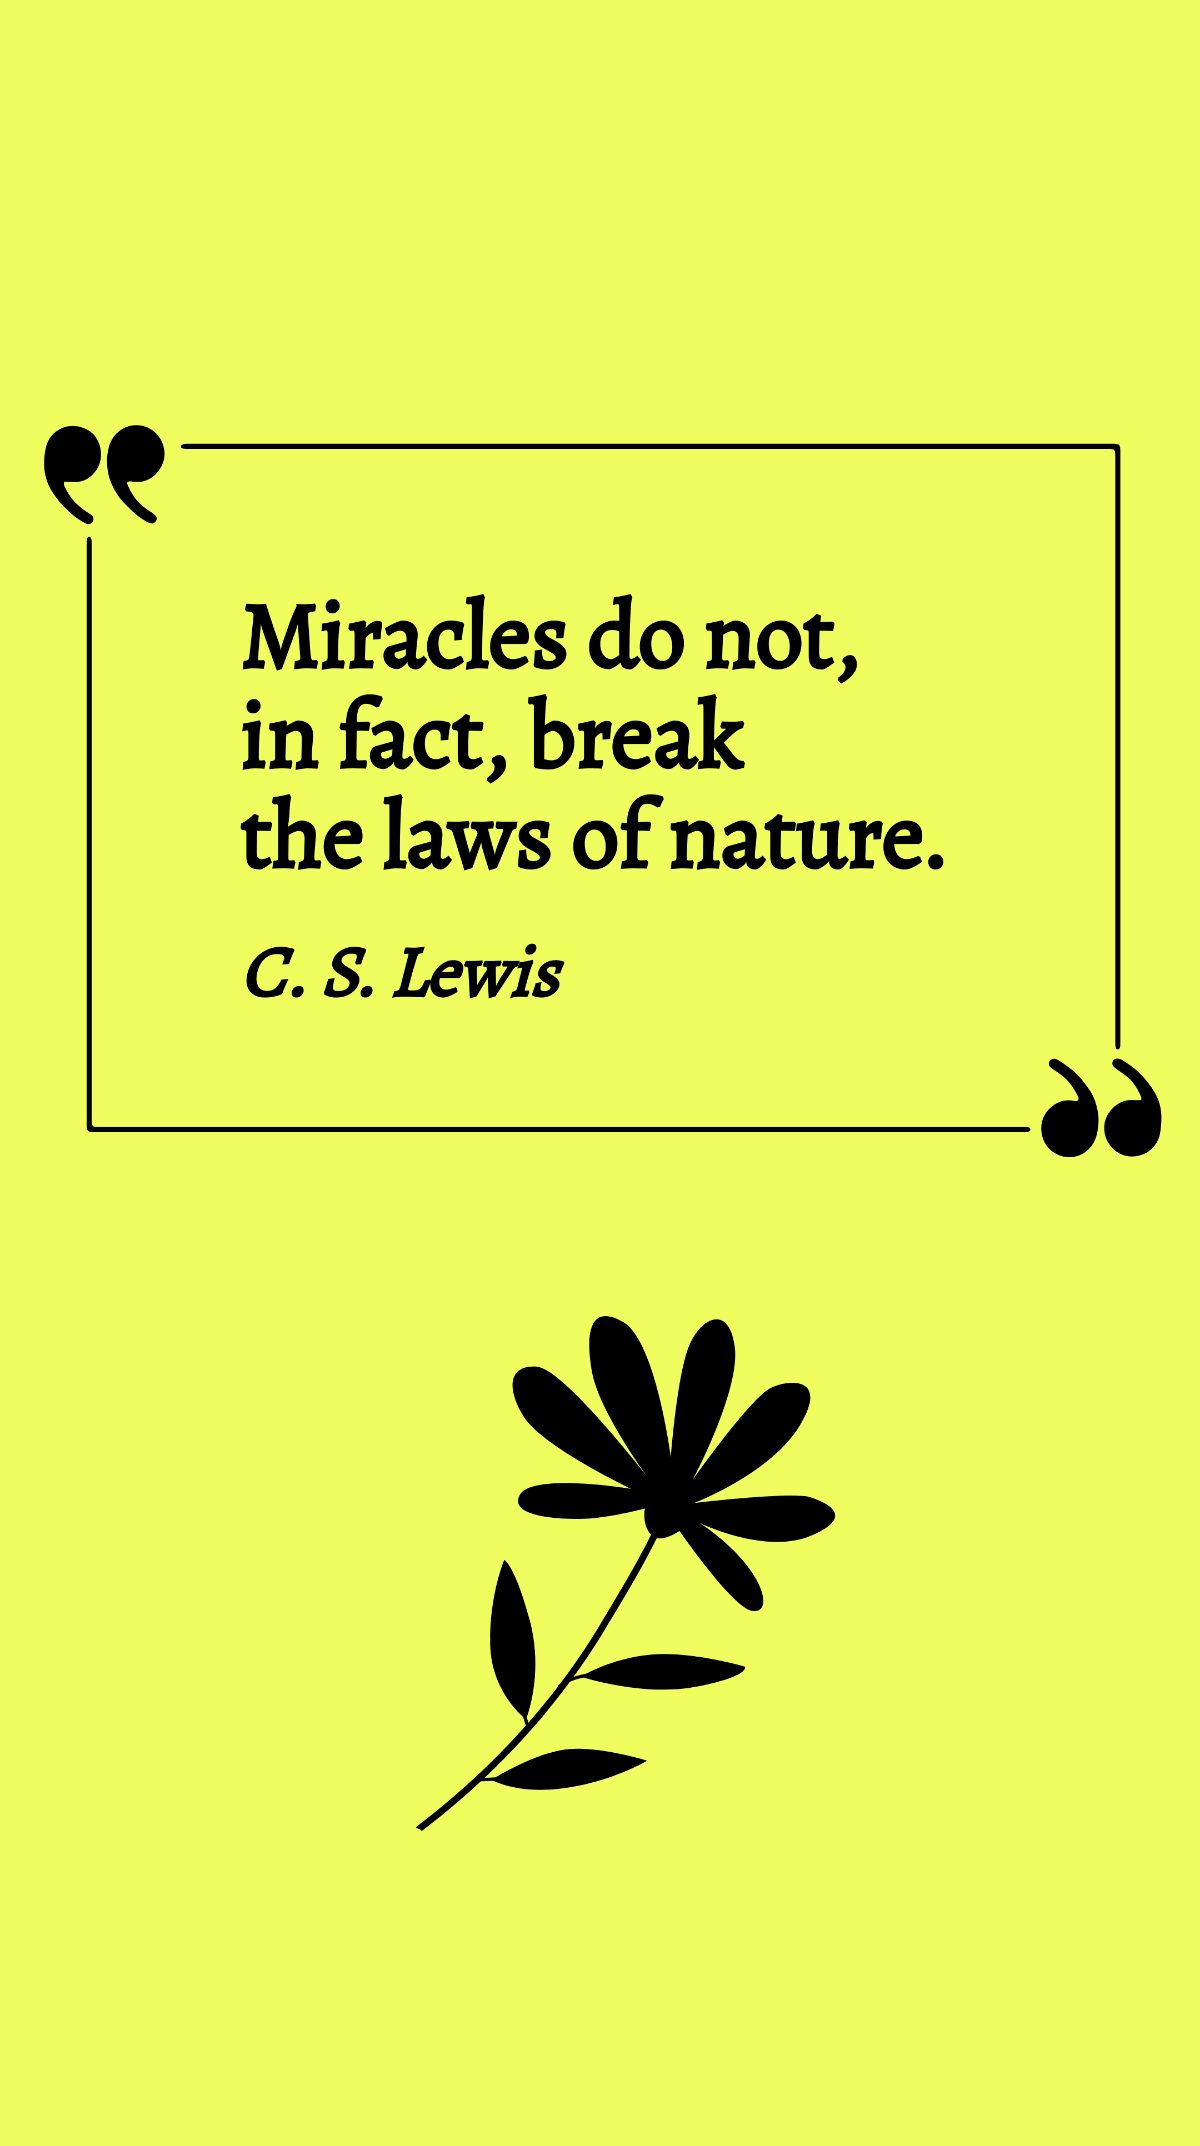 C. S. Lewis - Miracles do not, in fact, break the laws of nature. Template